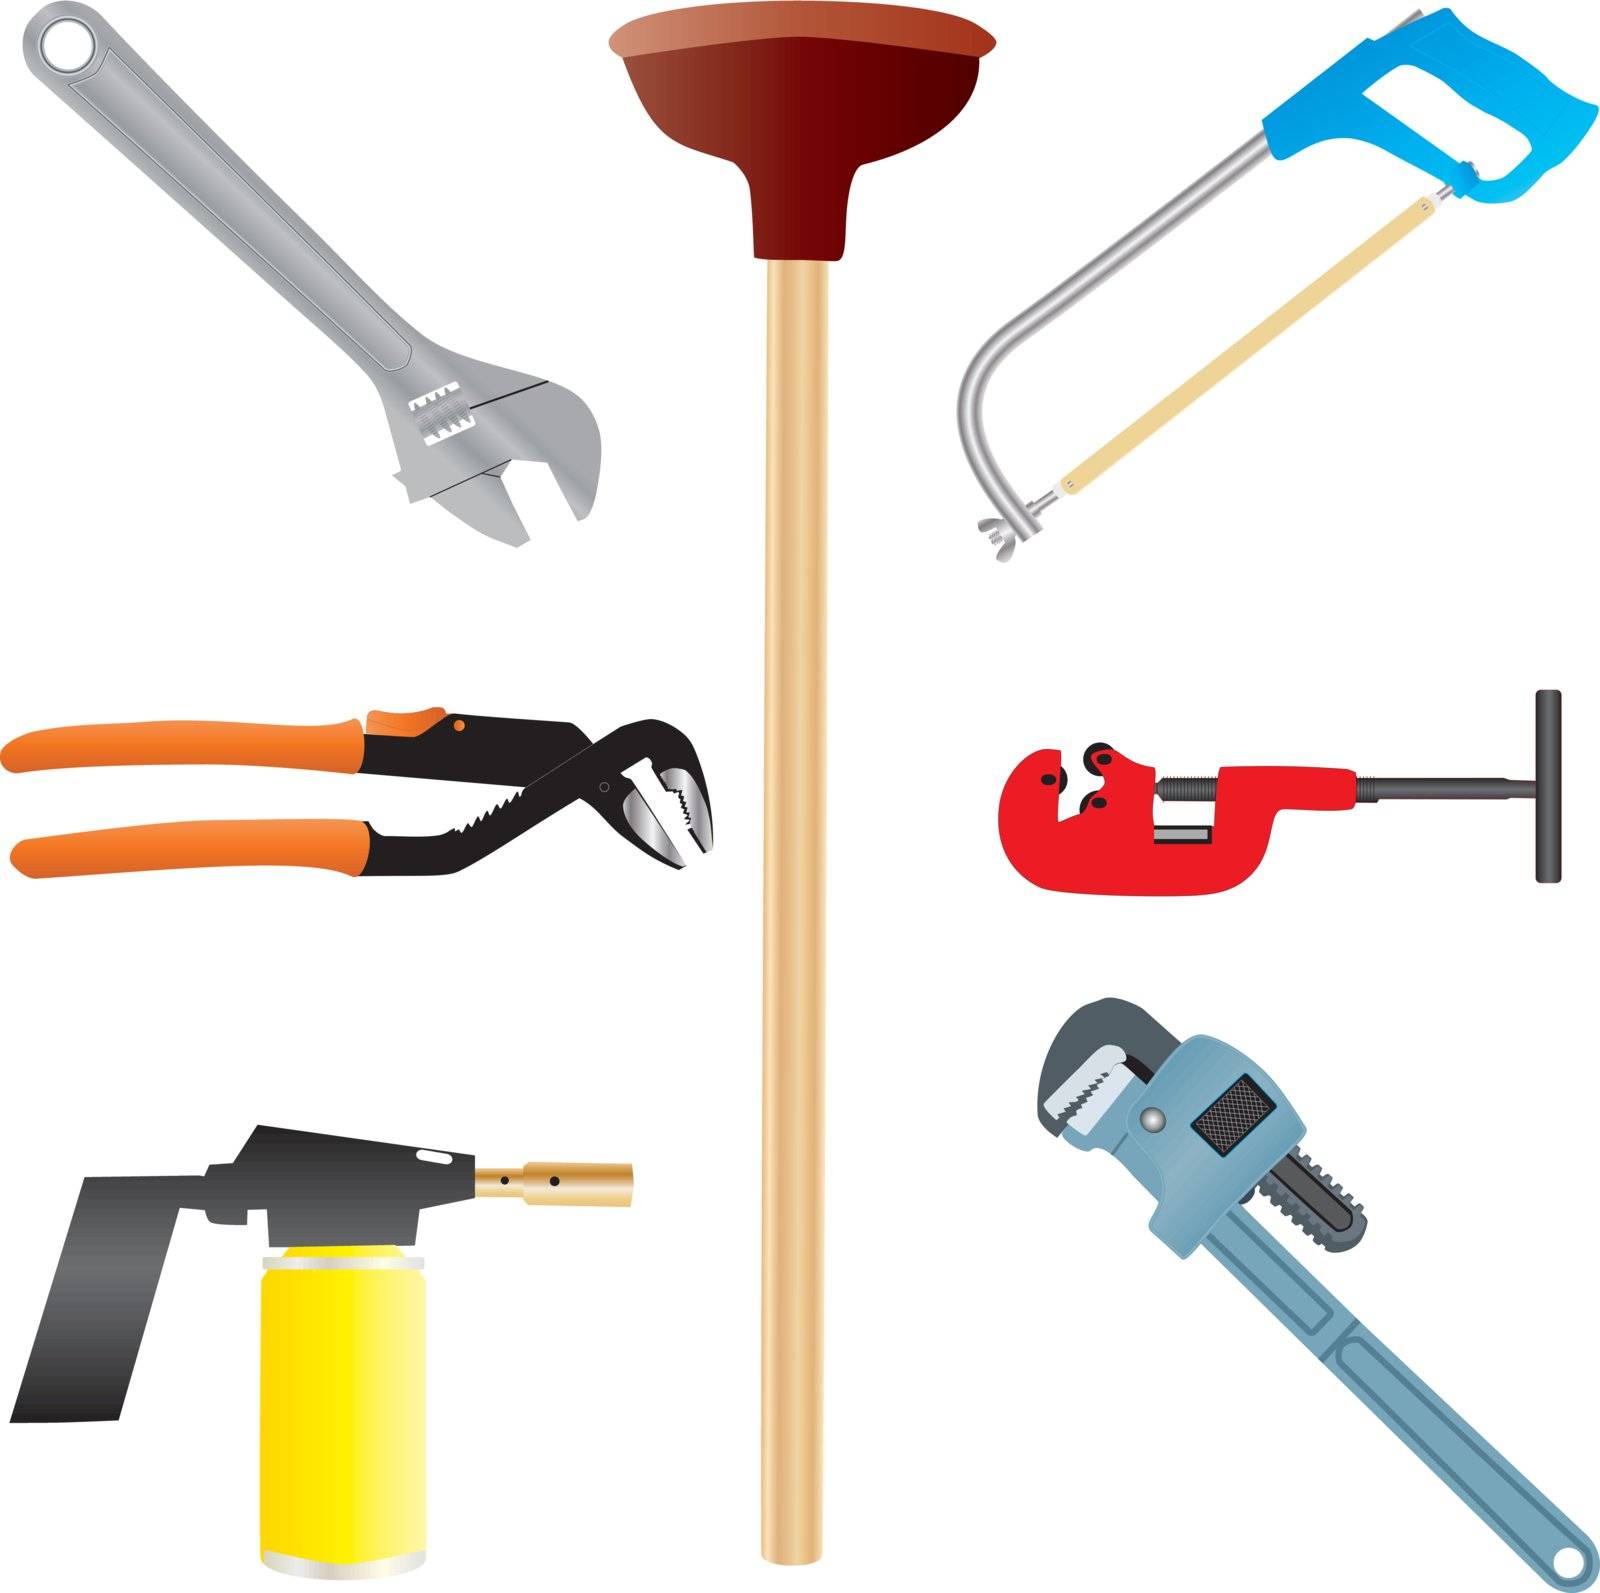 Plumbers Tools,Adjustable Spanner,Wrench,Pipe Wrench,Blow Torch,Pipe Cutter and Hacksaw